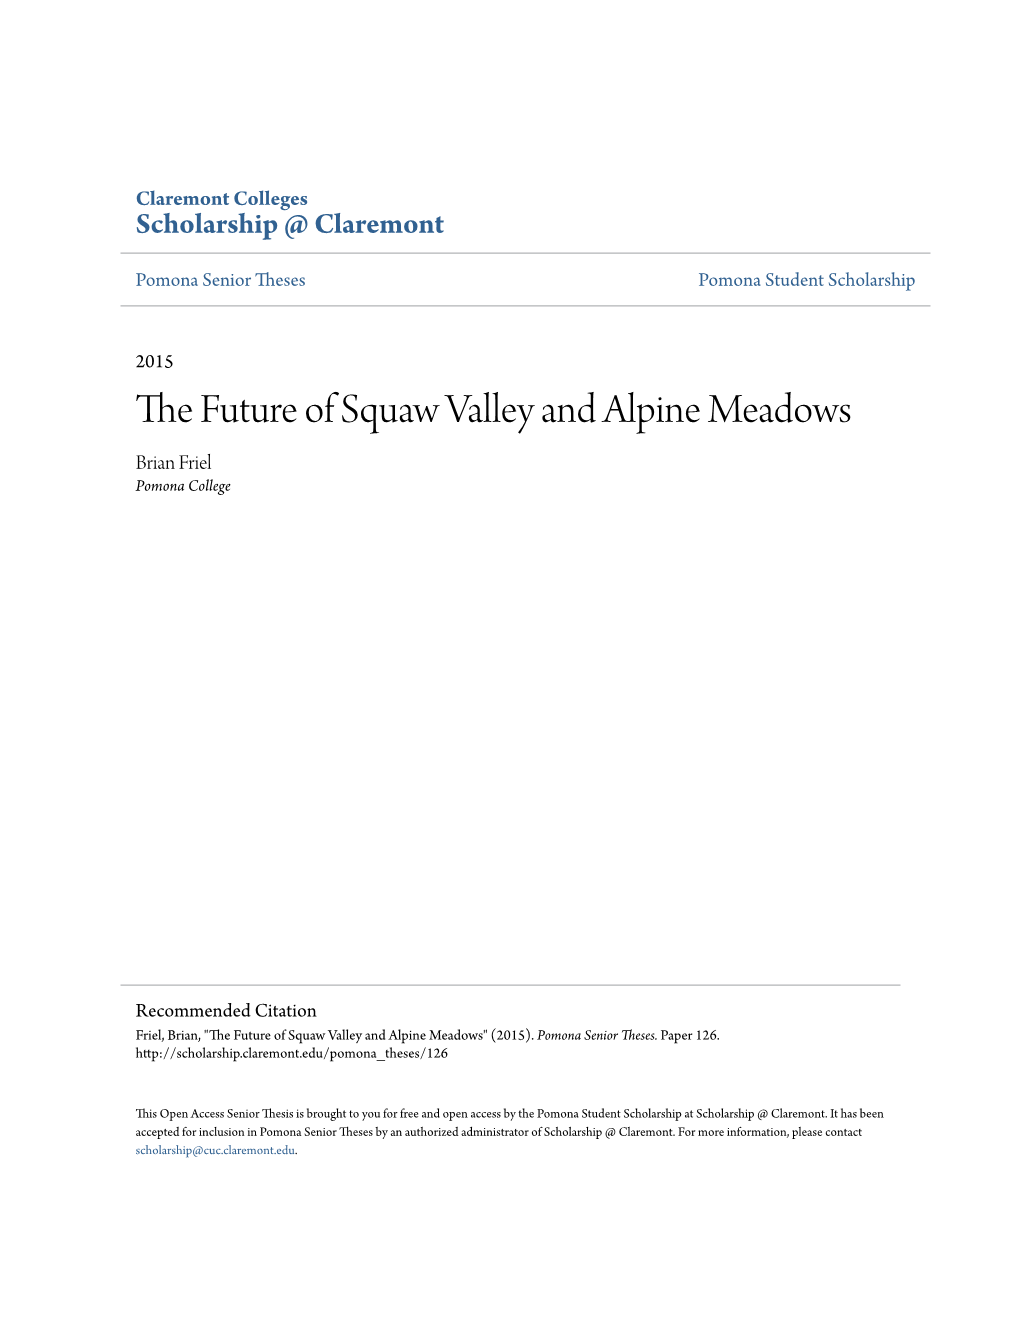 The Future of Squaw Valley and Alpine Meadows